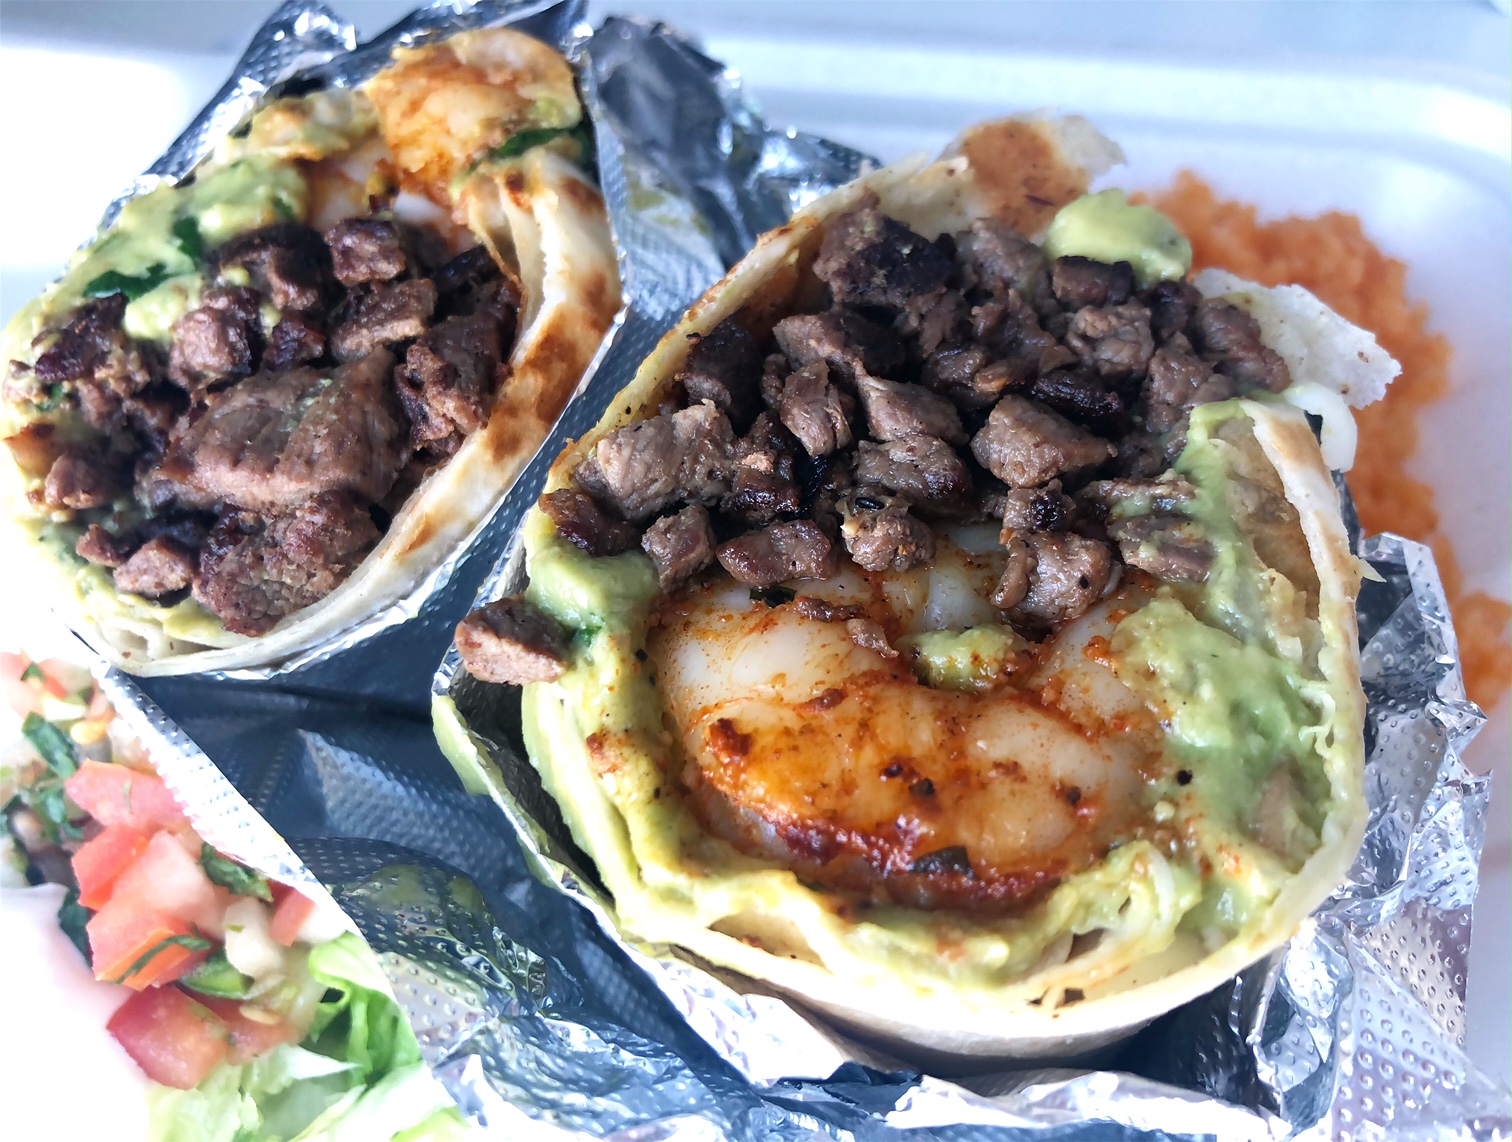 A burrito sliced in half shows shrimp and chopped steak with a generous amount of guacamole. Photo by Alyssa Buckley.